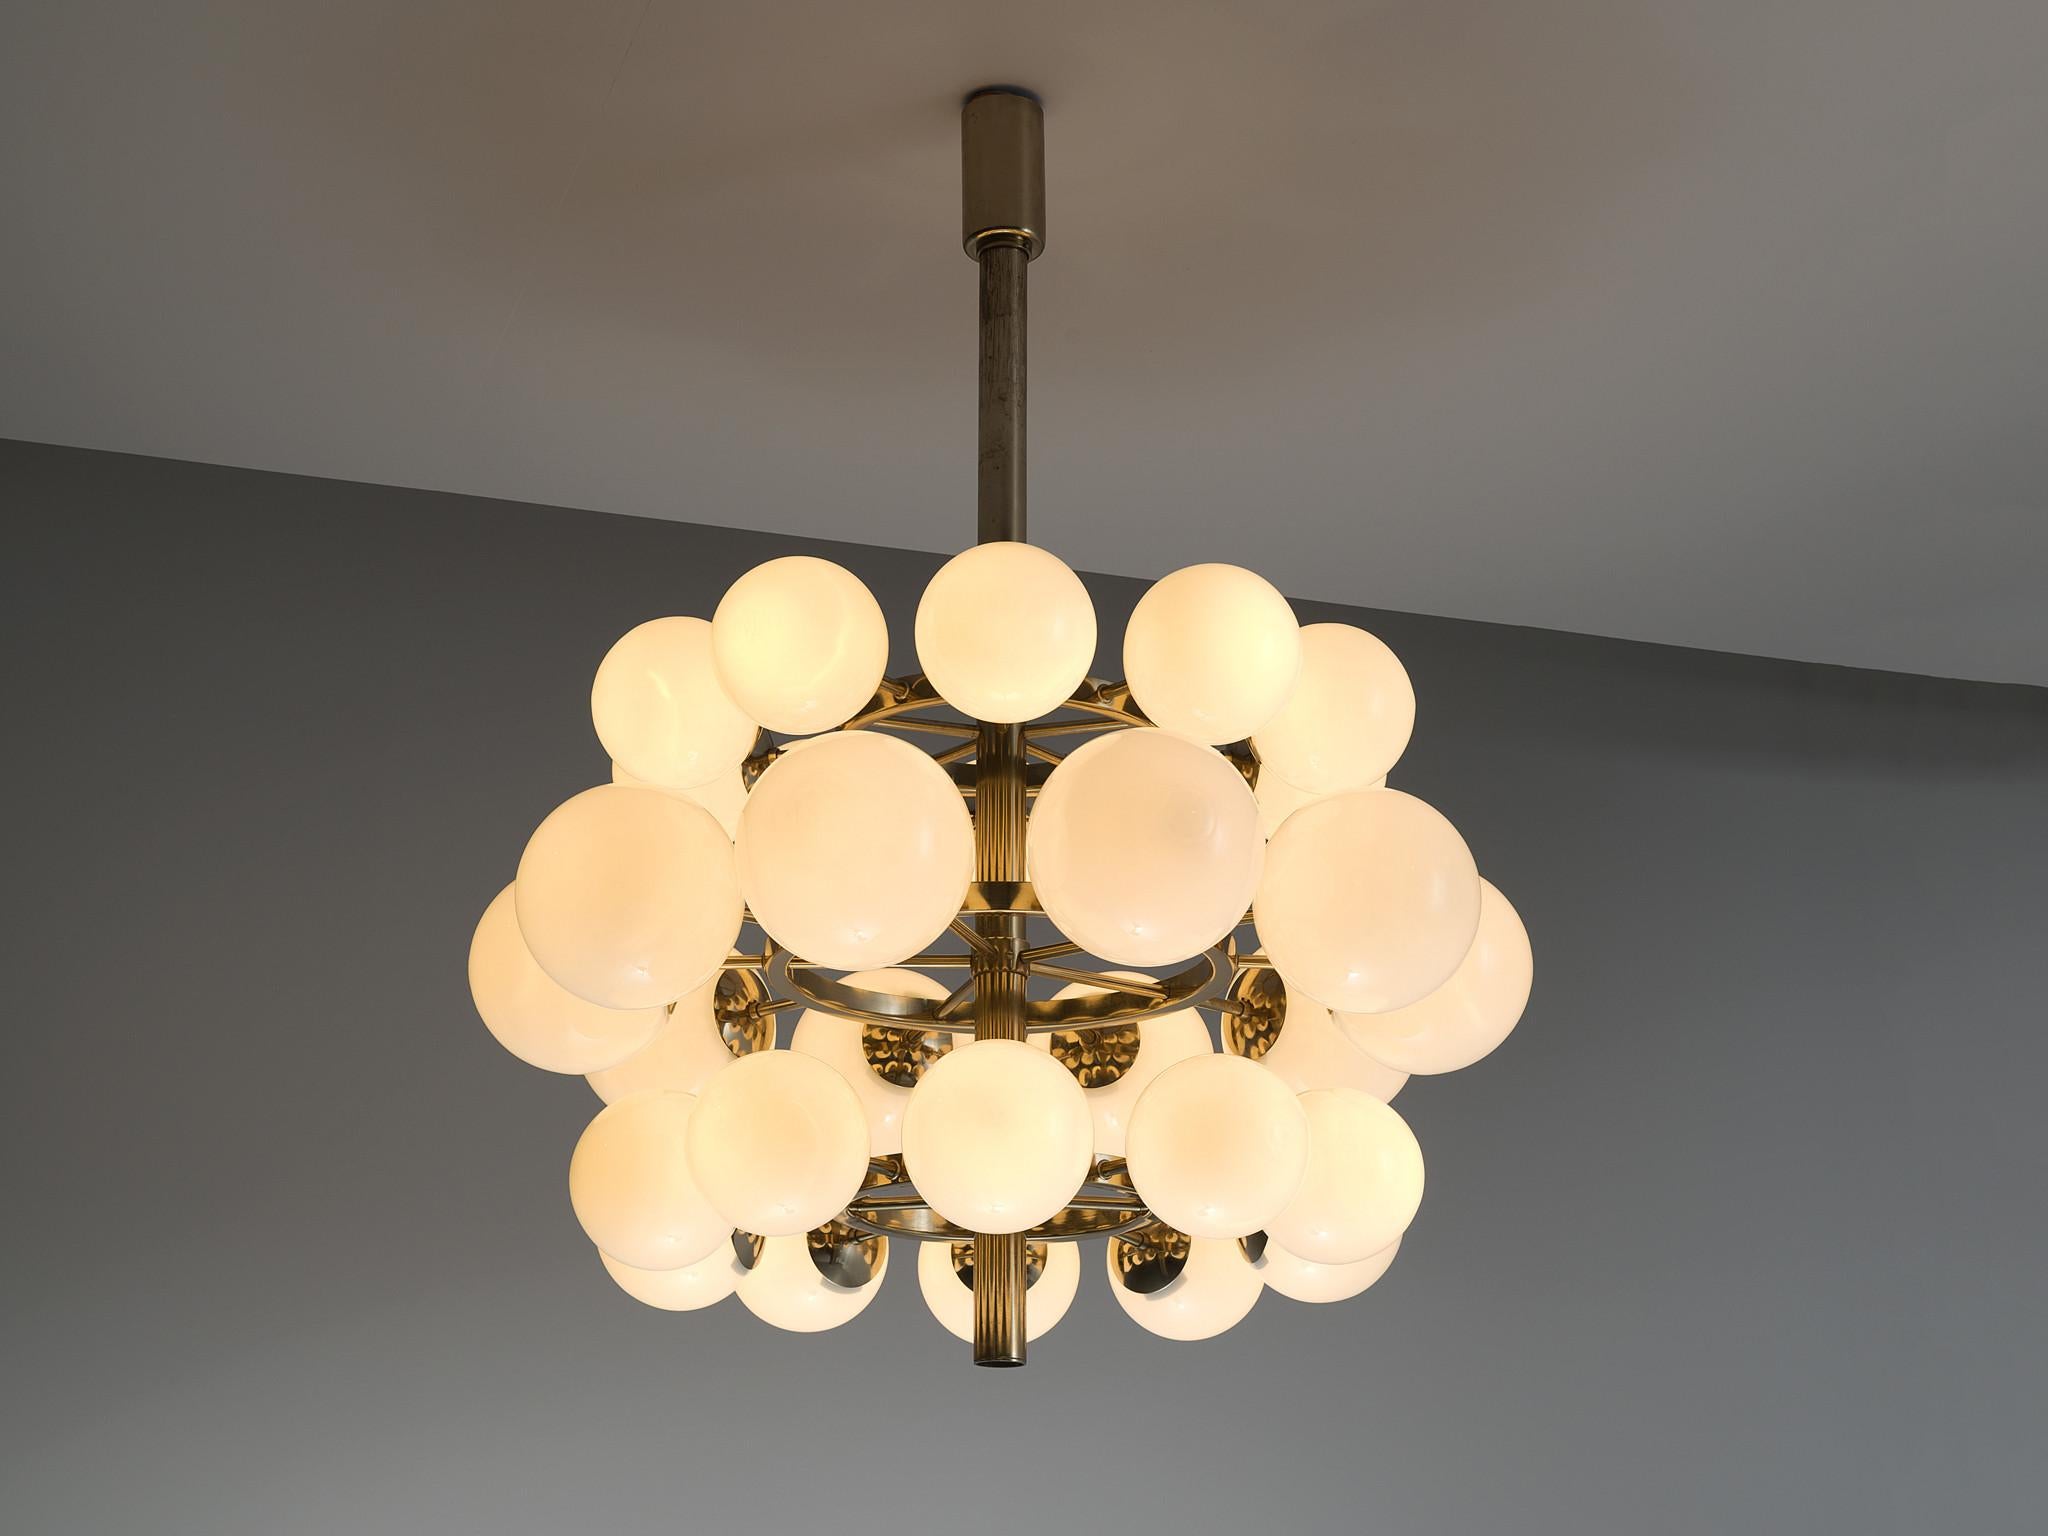 Sputnik chandelier, opaline glass, metal, Europe, 1970s.

This triple layered Sputnik has 30 opaline glass globes. The chandelier consists of a metal fixture with thirty arms, all with an opal sphere. Due to the opaque glass, this chandelier creates